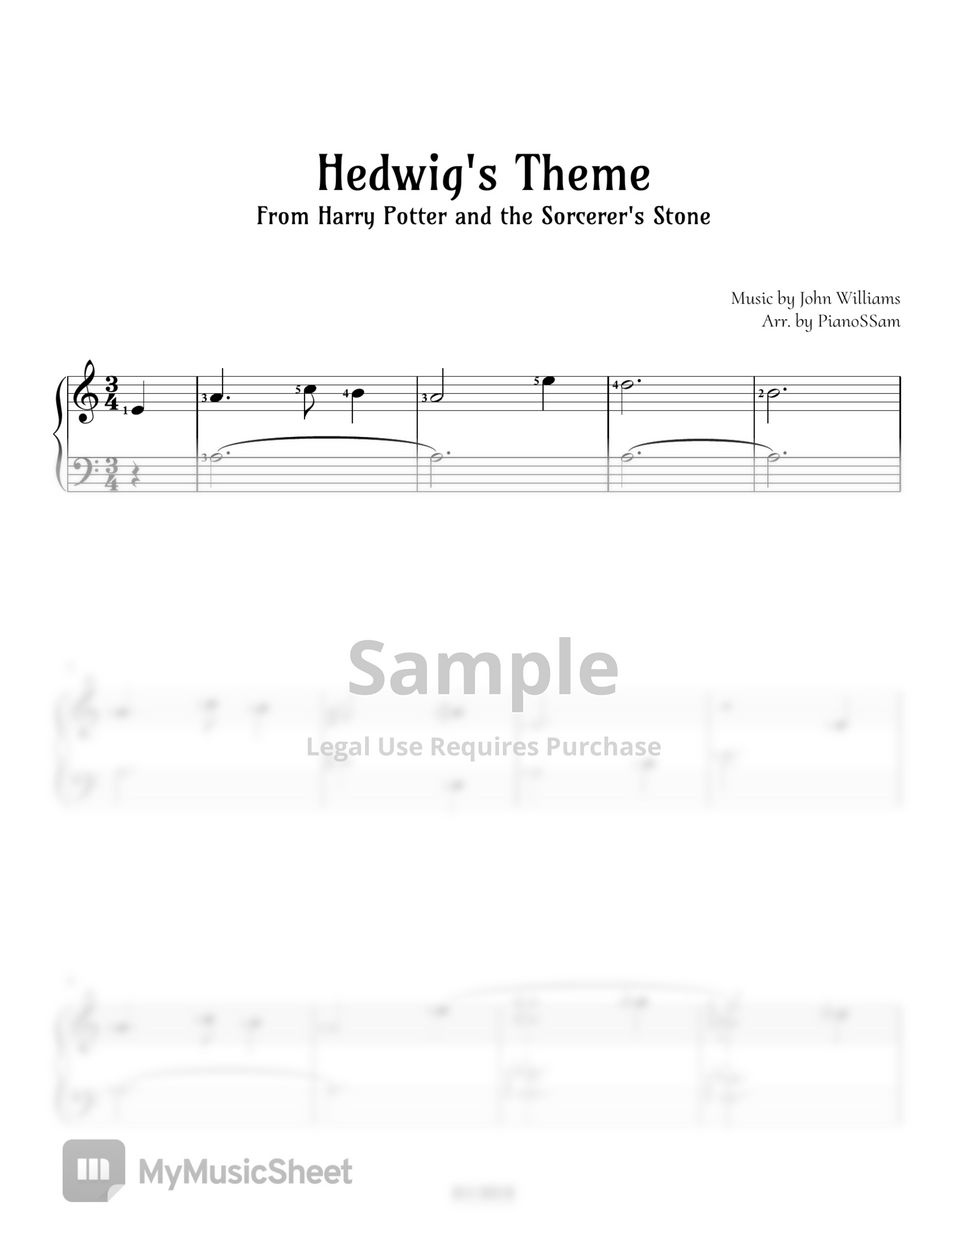 John Williams - [Easy] Hedwig's Theme (Harry Potter) Sheets by